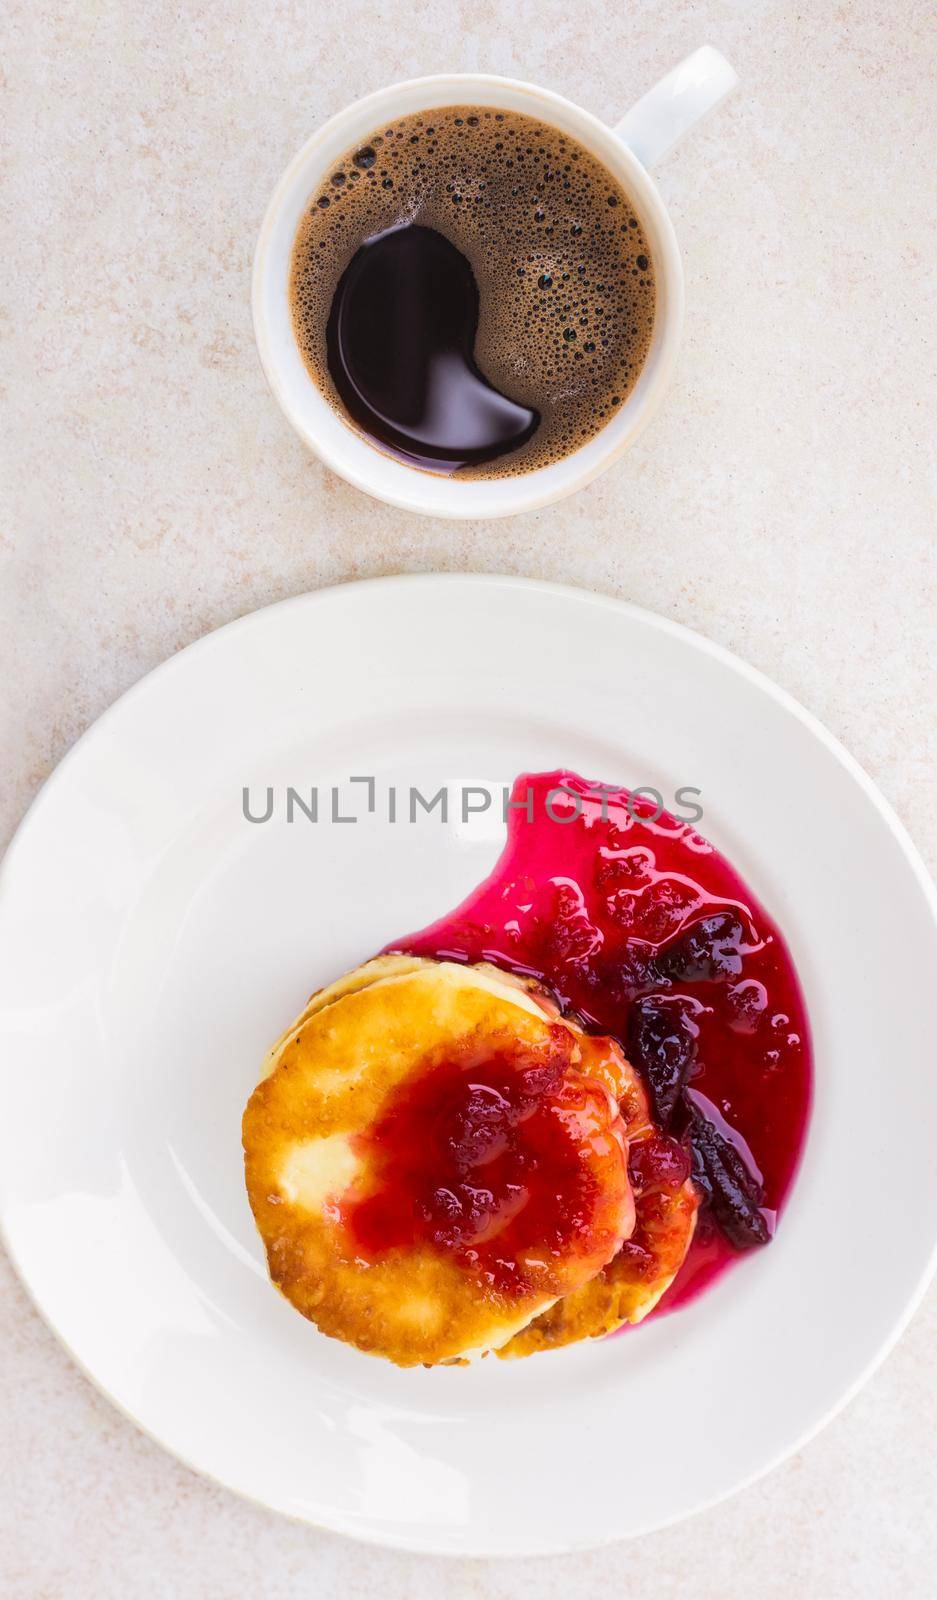 Fresh cheese cakes with plum jam and a mug with freshly brewed coffee on a light table surface, top view. Wake up in the morning, start a new day. Hearty breakfast by levnat09